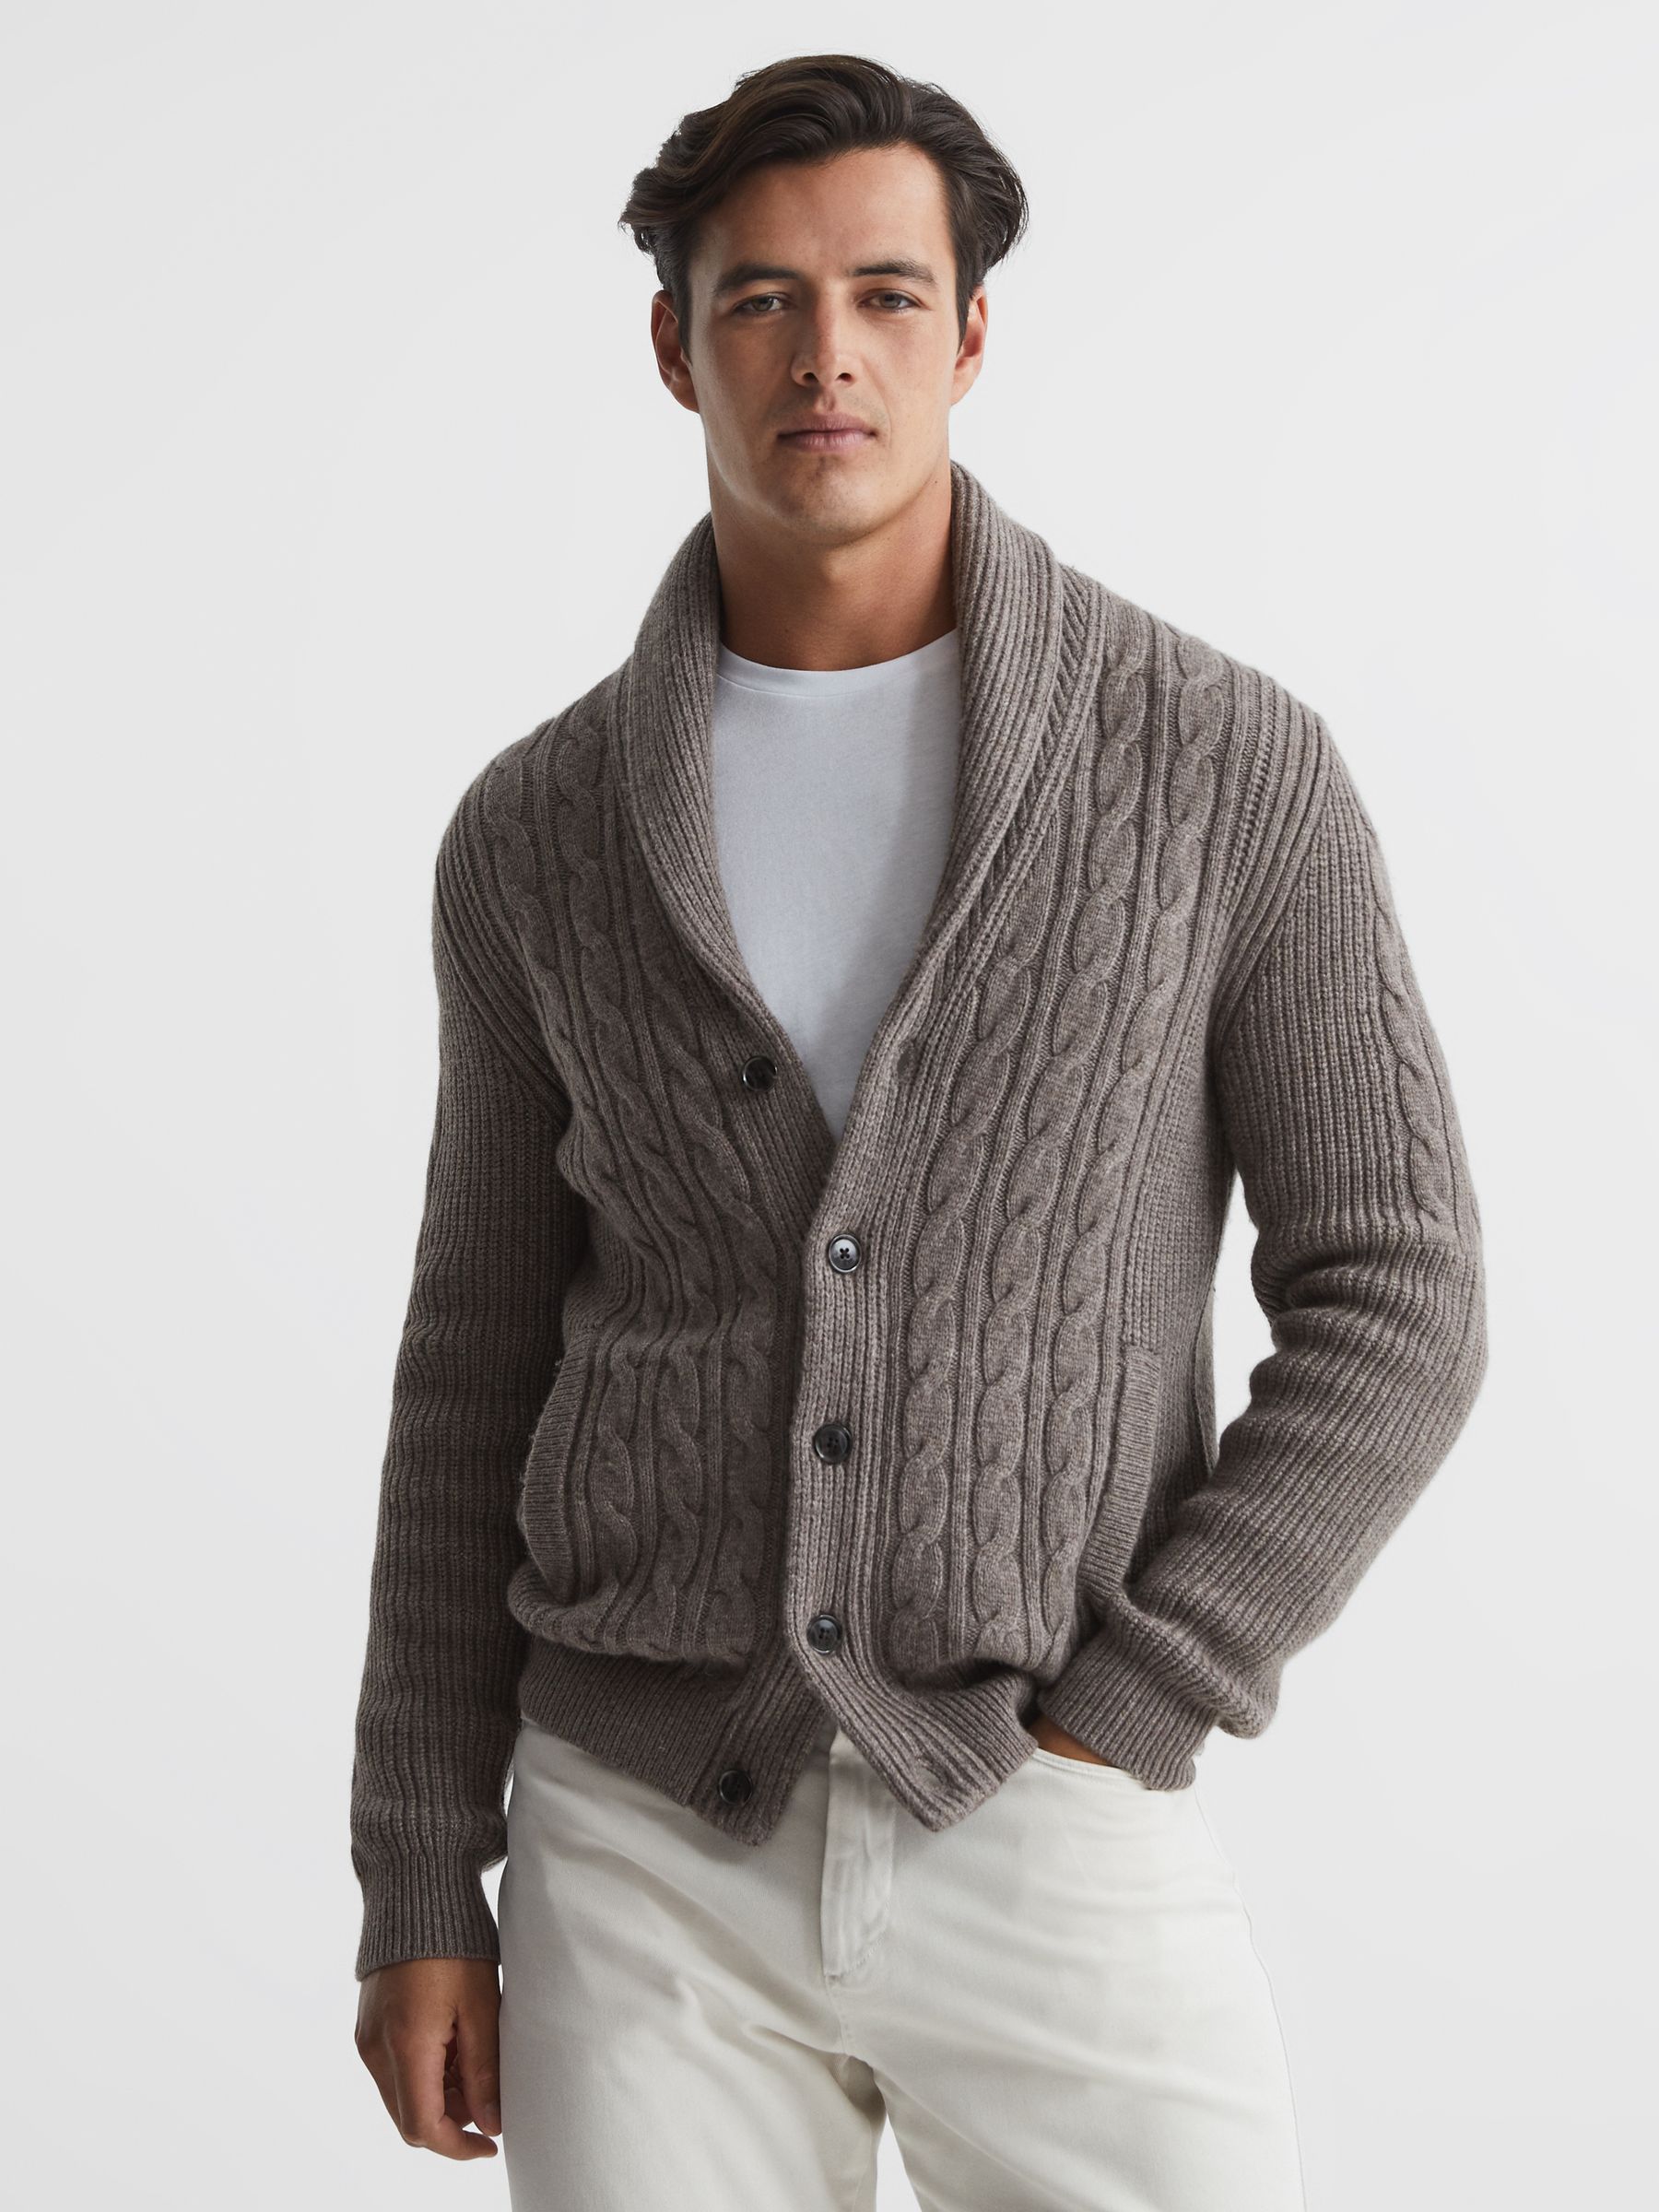 Reiss Romash Shawl Collar Cable Knit Wool Cashmere Cardigan | REISS USA